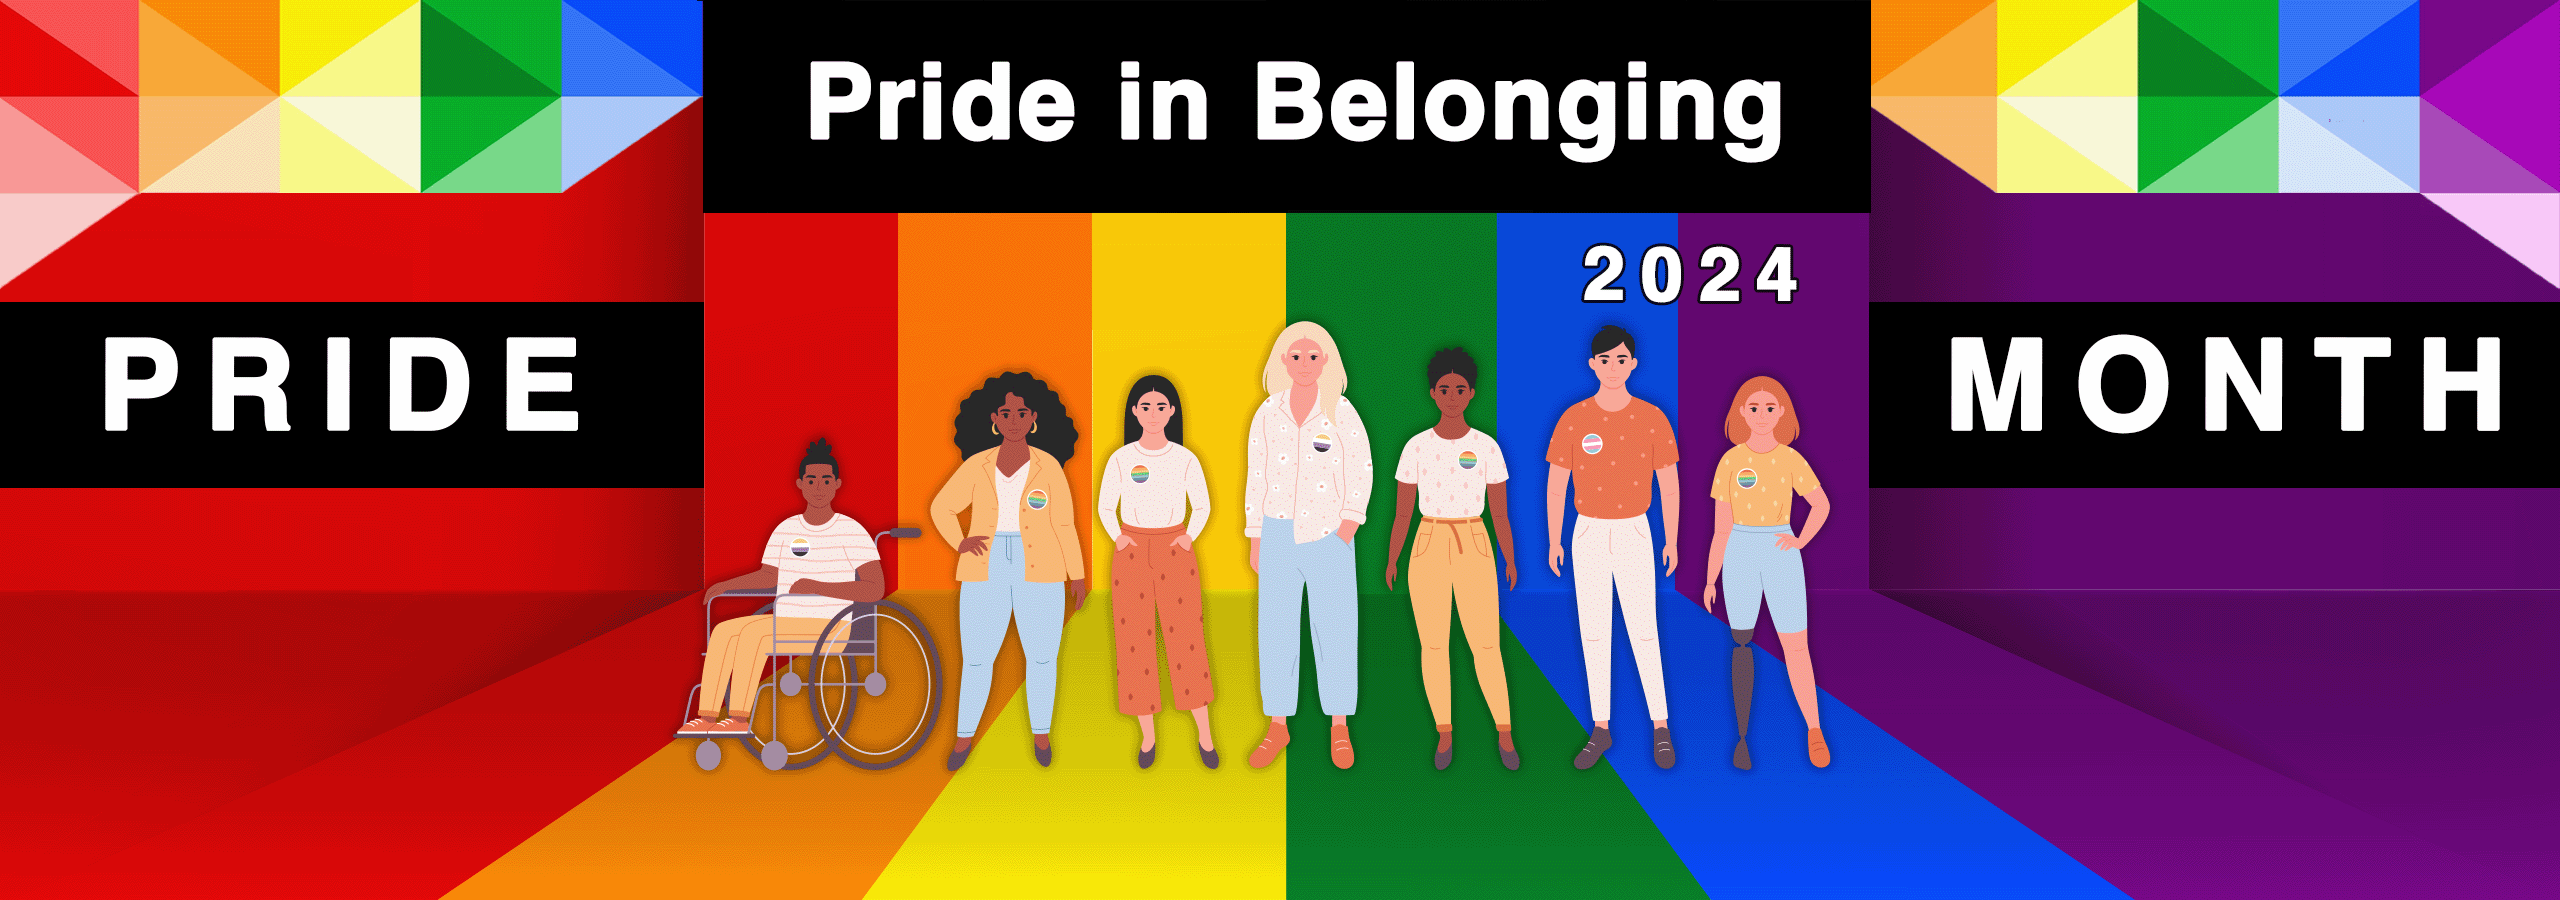 The 2024 Pride Month artwork features the theme, Pride in Belonging, with a diverse group of people standing in front of the original Pride flag created by Gilbert Baker.